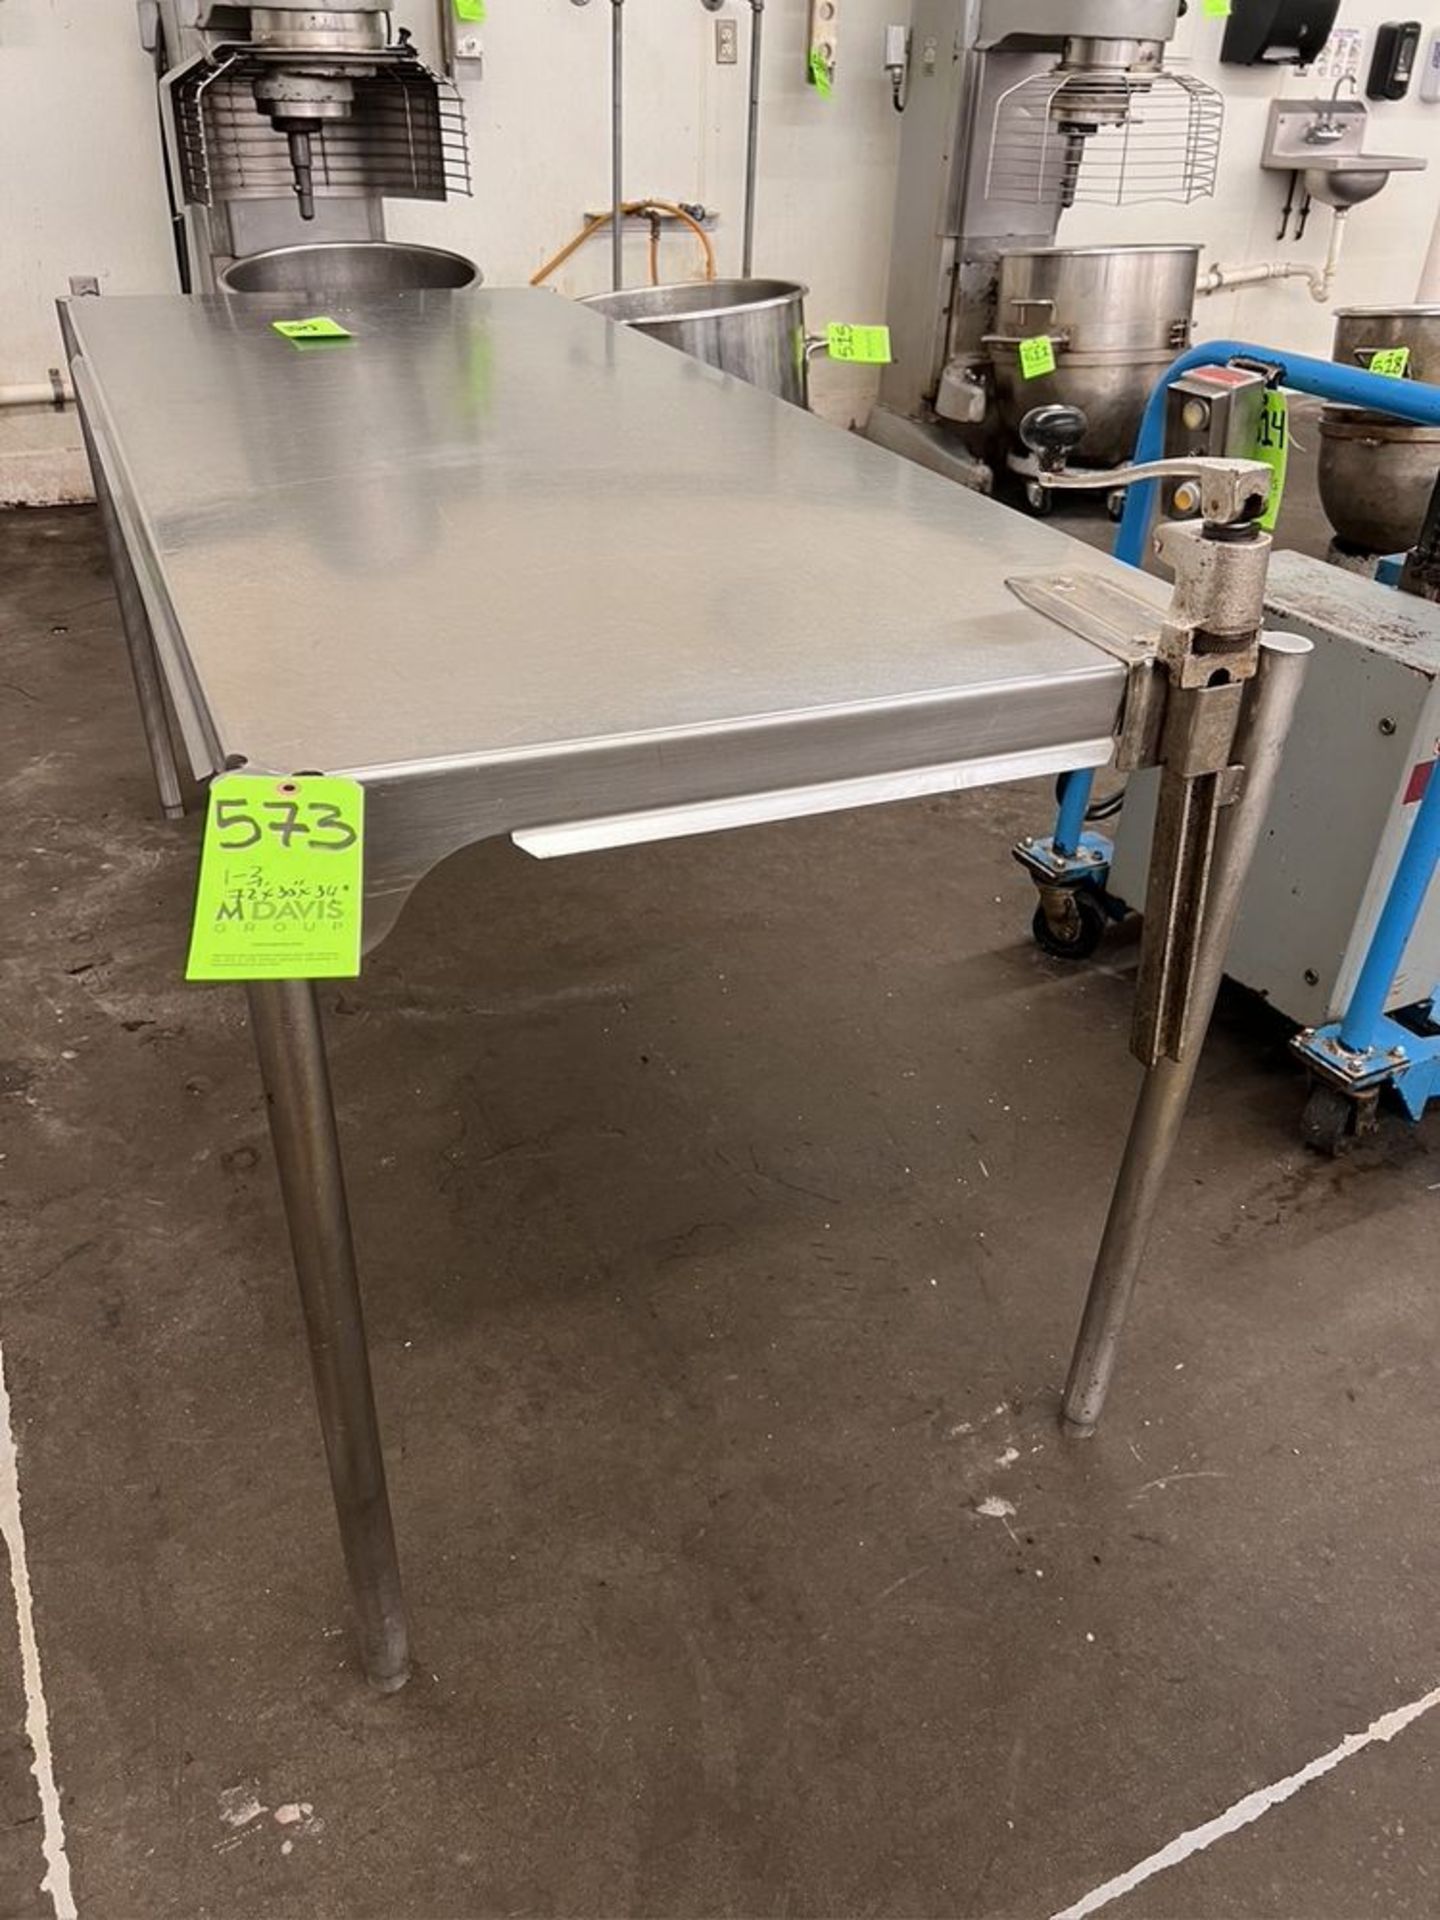 (3) S/S TABLES, (1) WITH EDLUND CAN OPENER,  APPROX. DIMS 72 X 30 X 34, 72 X 30 X 34, 72 X 30 X 32